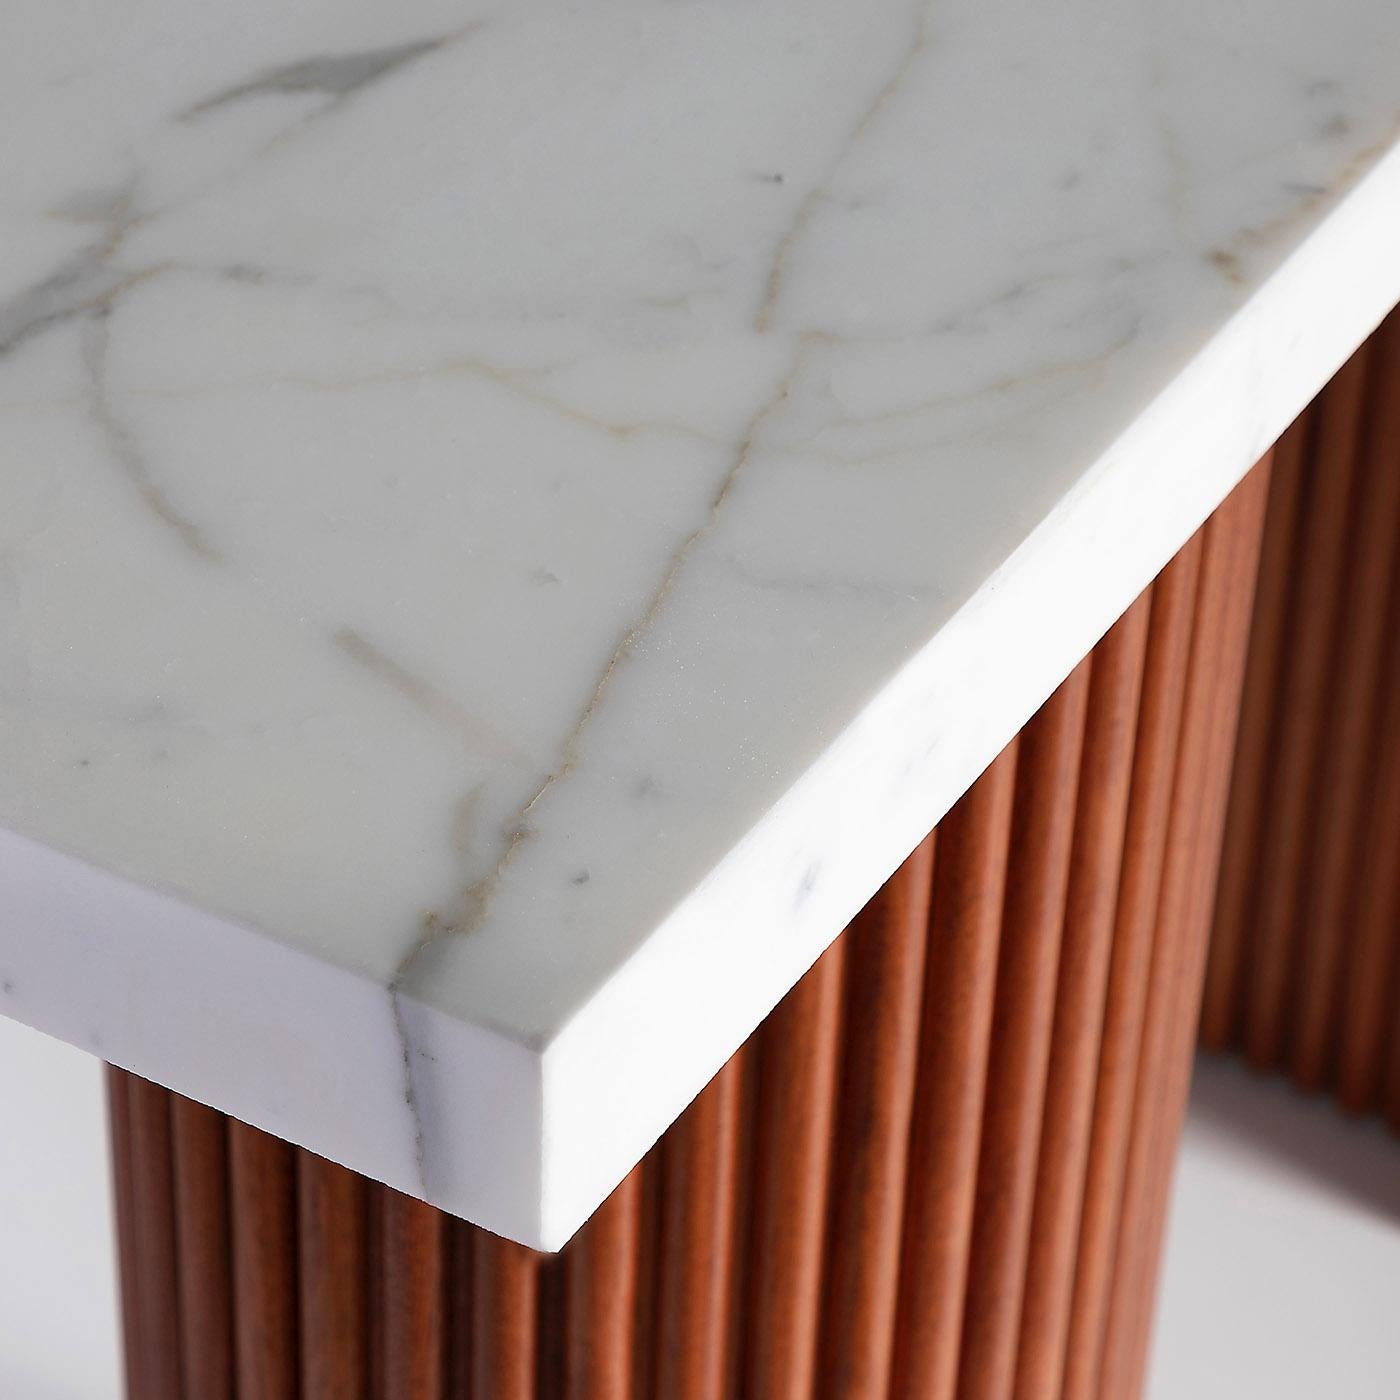 Part of the Alchimia Collection, this console boasts a sculptural silhouette sure to uplift any modern entryway or hallway. A thick rectangular top in prized Calacatta Oro marble rests on a couple of ribbed mahogany legs offering a new perspective